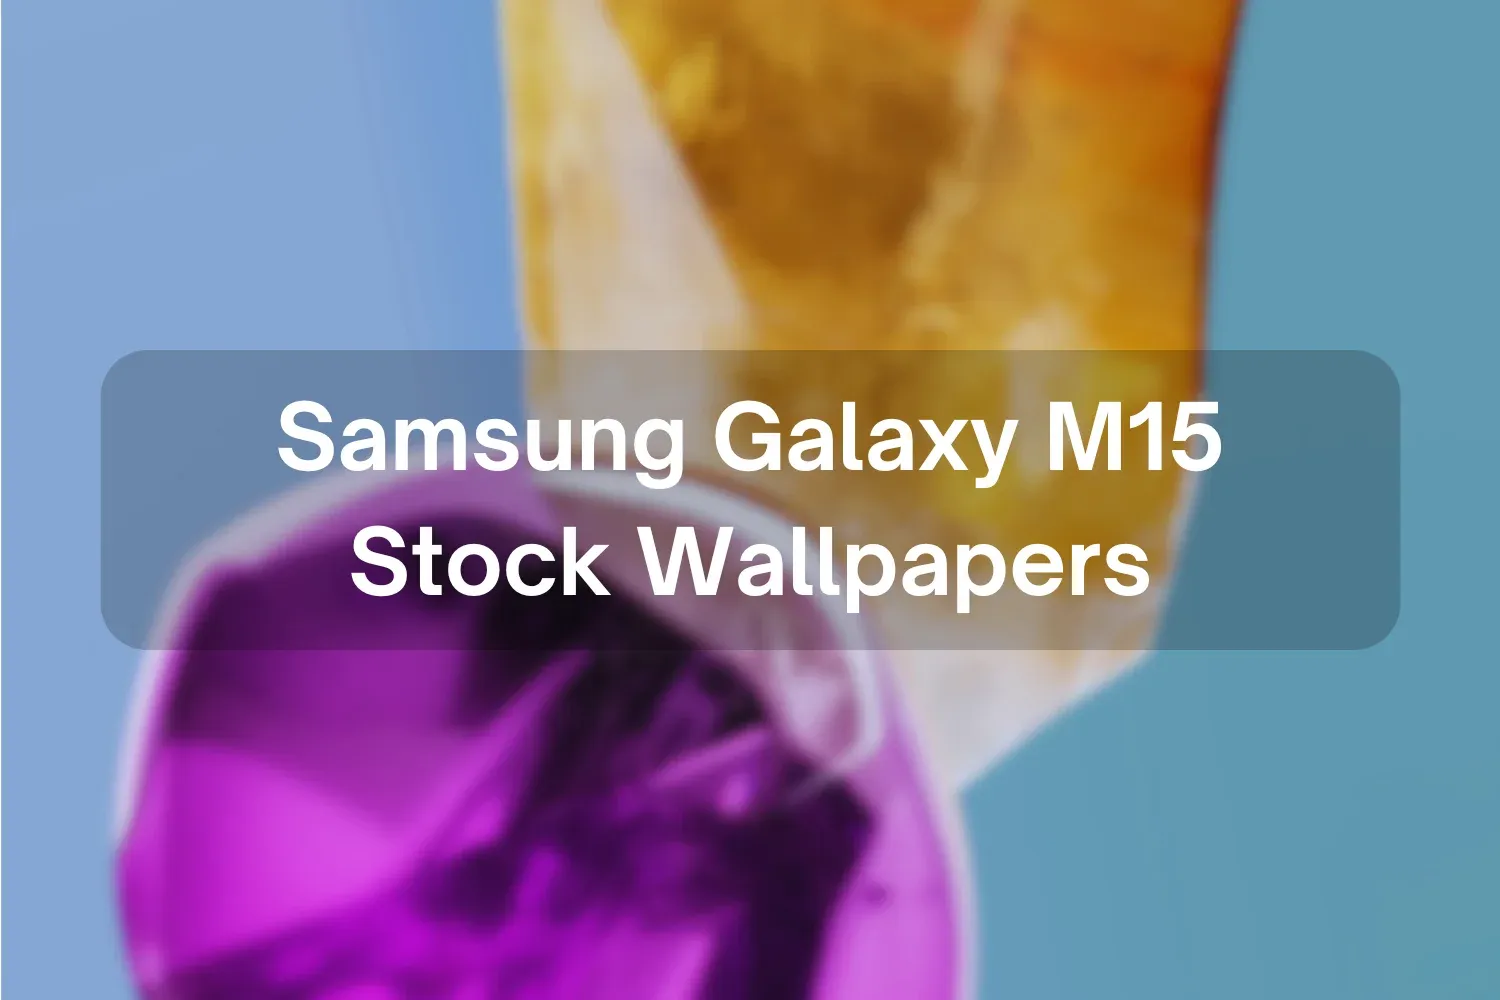 Download Samsung Galaxy M15 Wallpapers in FHD+